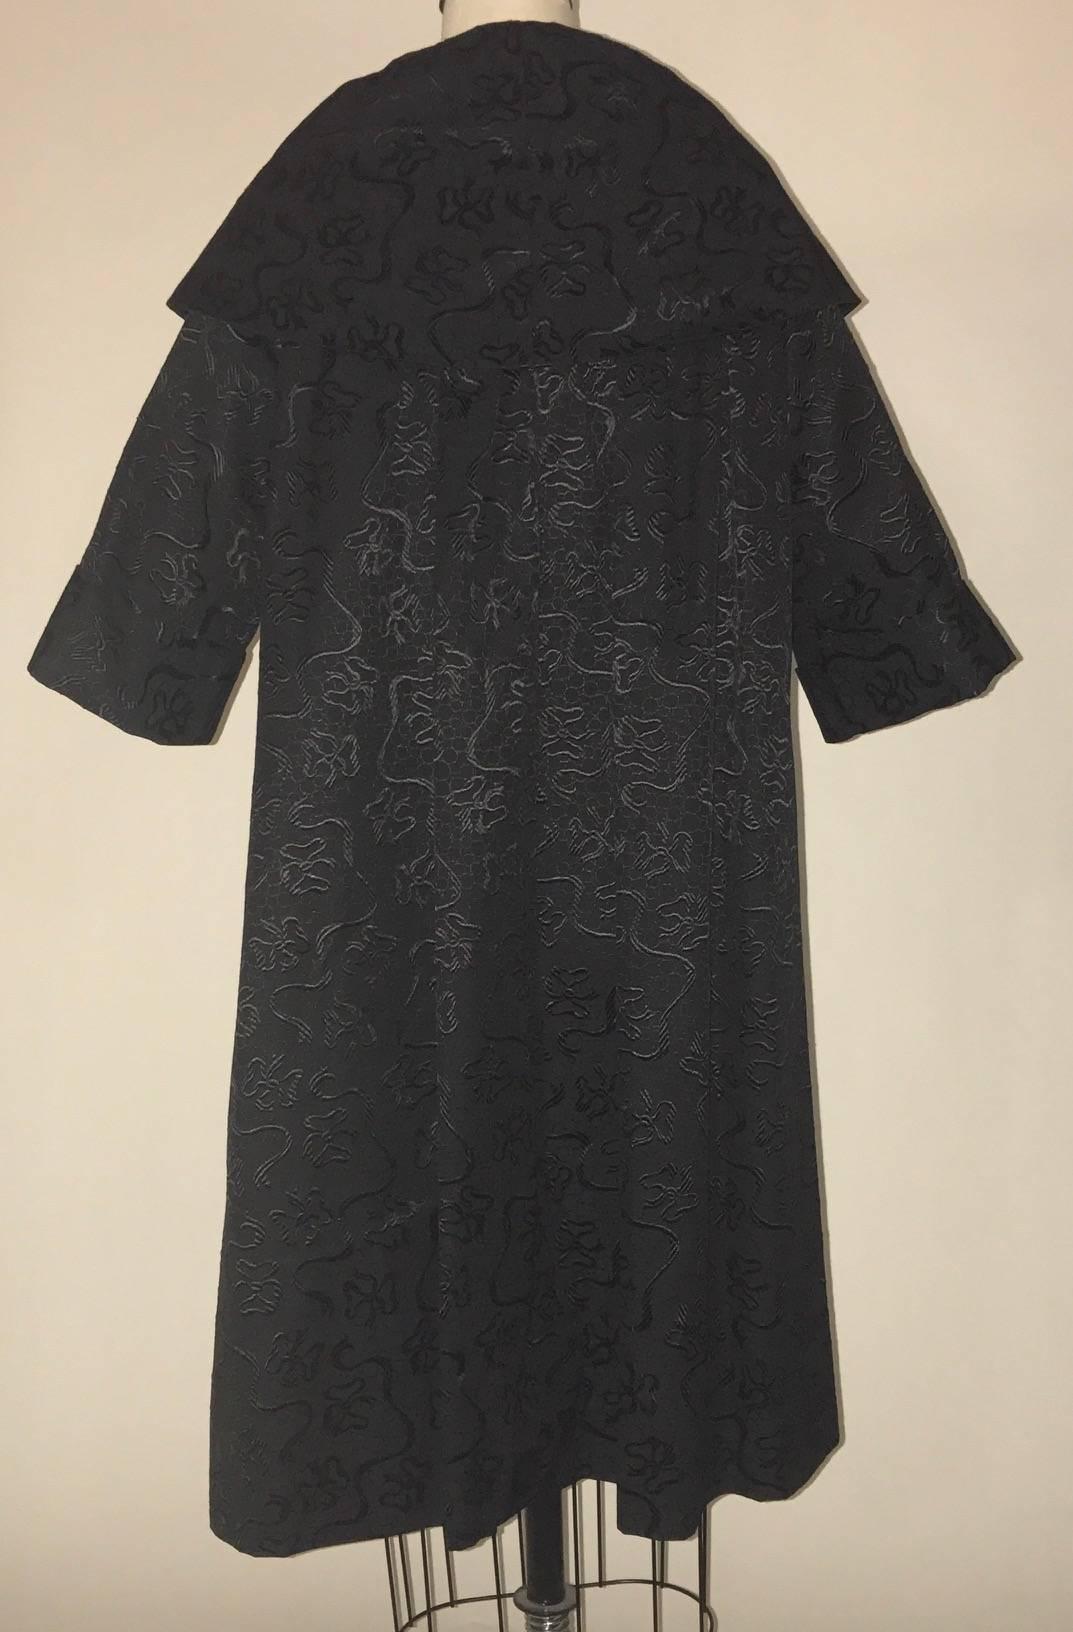 I Magnin & Co late 1950s black jacquard bow print swing coat. Three buttons at front. Mid length sleeve and large shawl collar. Pockets at side seams.

Content unknown.
Fully lined.

No size label, see measurements. Shoulders best fit an XS, but may